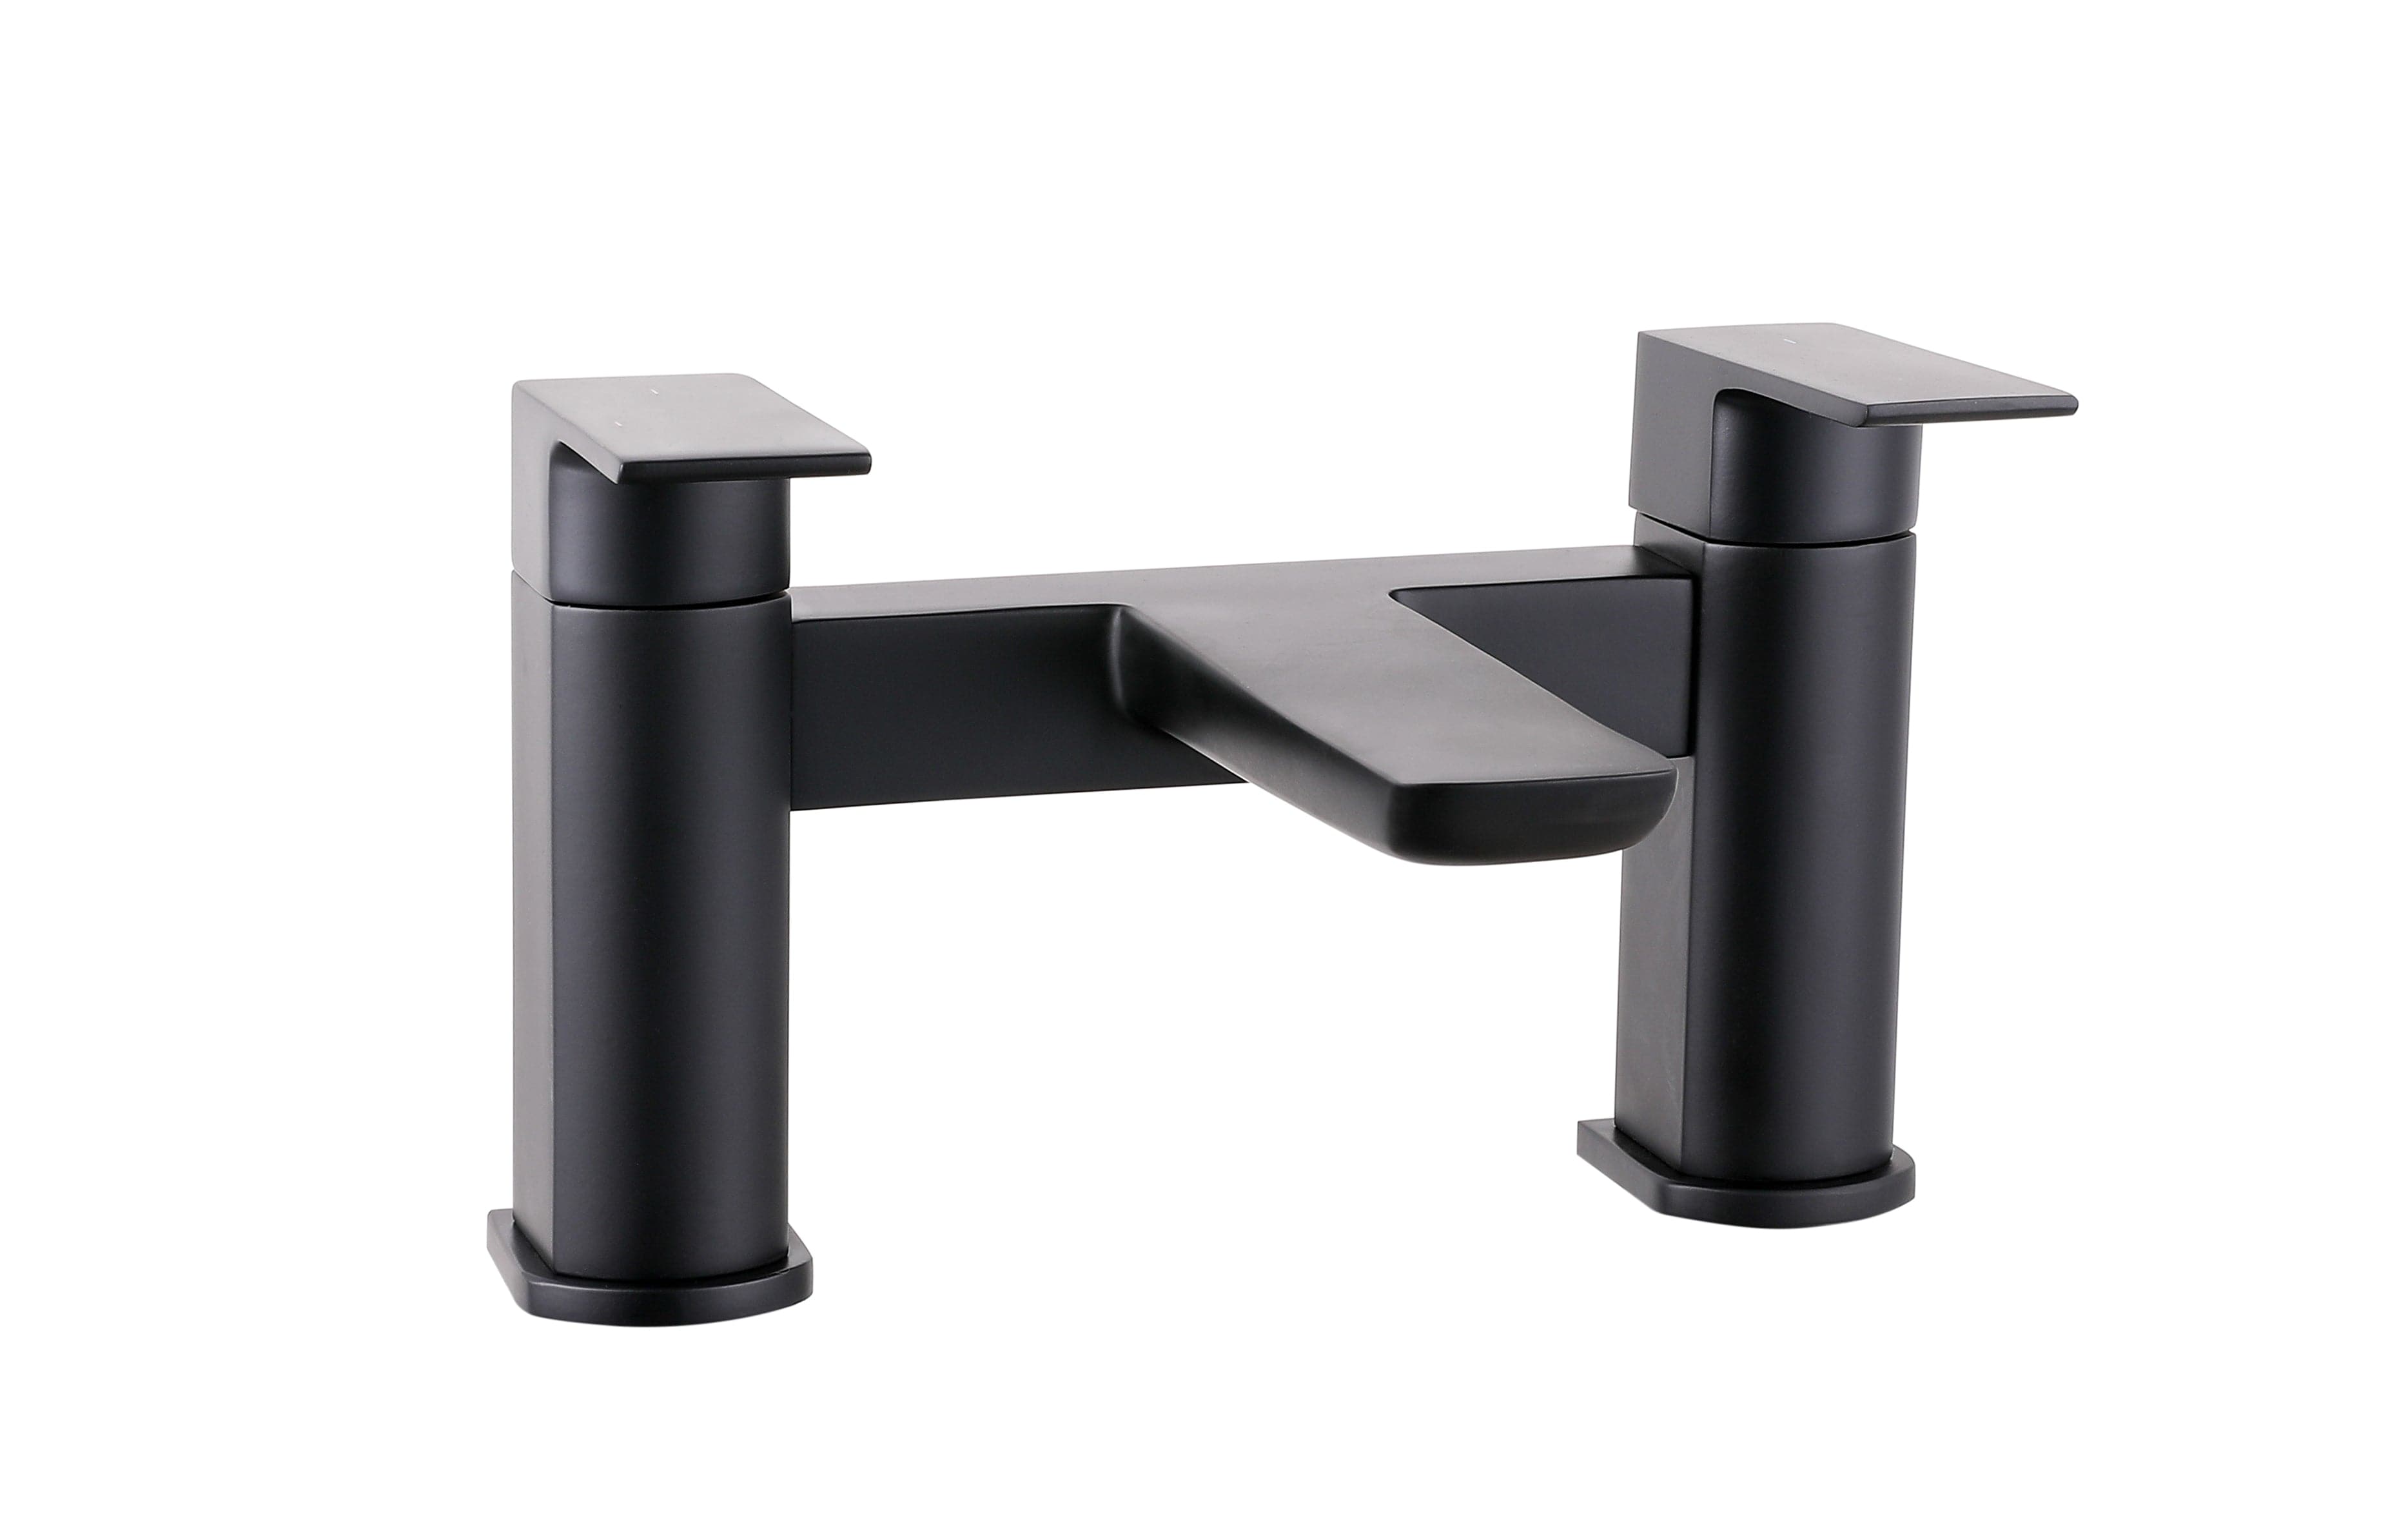 Lunar Soft Square Bath Filler Mixer Tap in Matt Black finish, modern design, perfect for stylish UK bathrooms, combines luxury with functionality - Bathroom4less.co.uk.